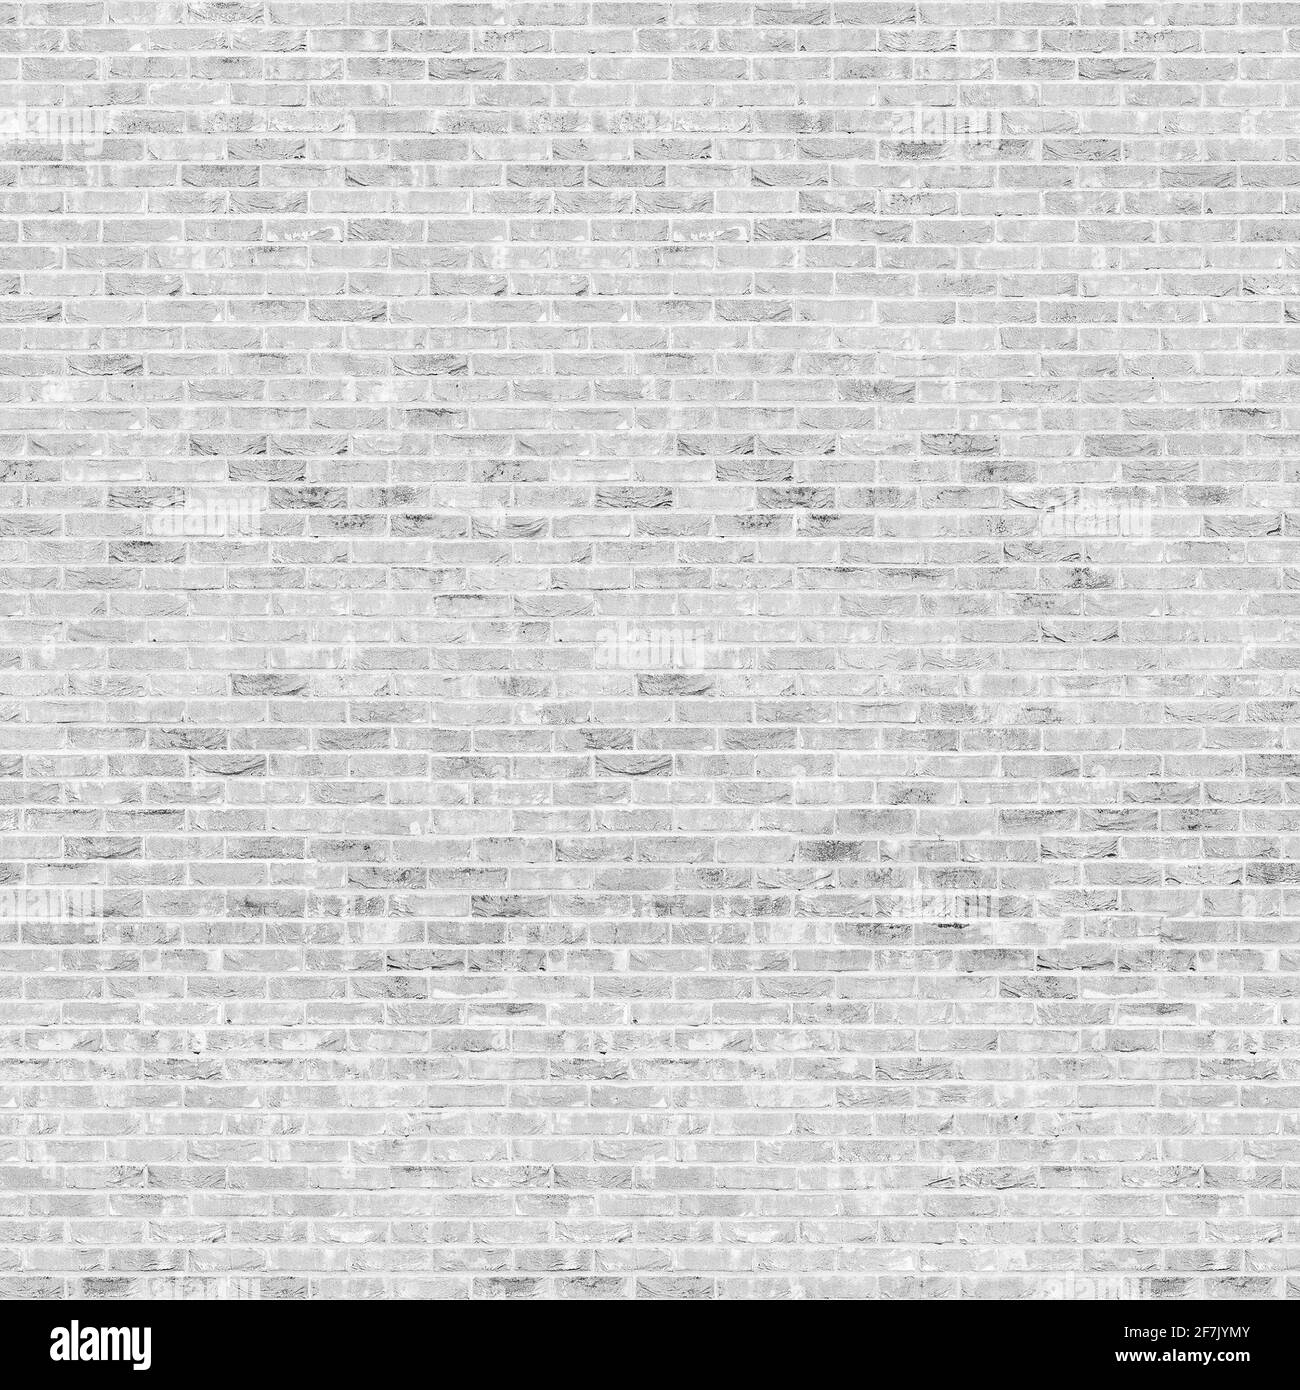 Seamless texture White Brick Burnt . Tiling clean for background pattern. Rectangle mosaic tiles wall high resolution. Old or artificially aged in pro Stock Photo